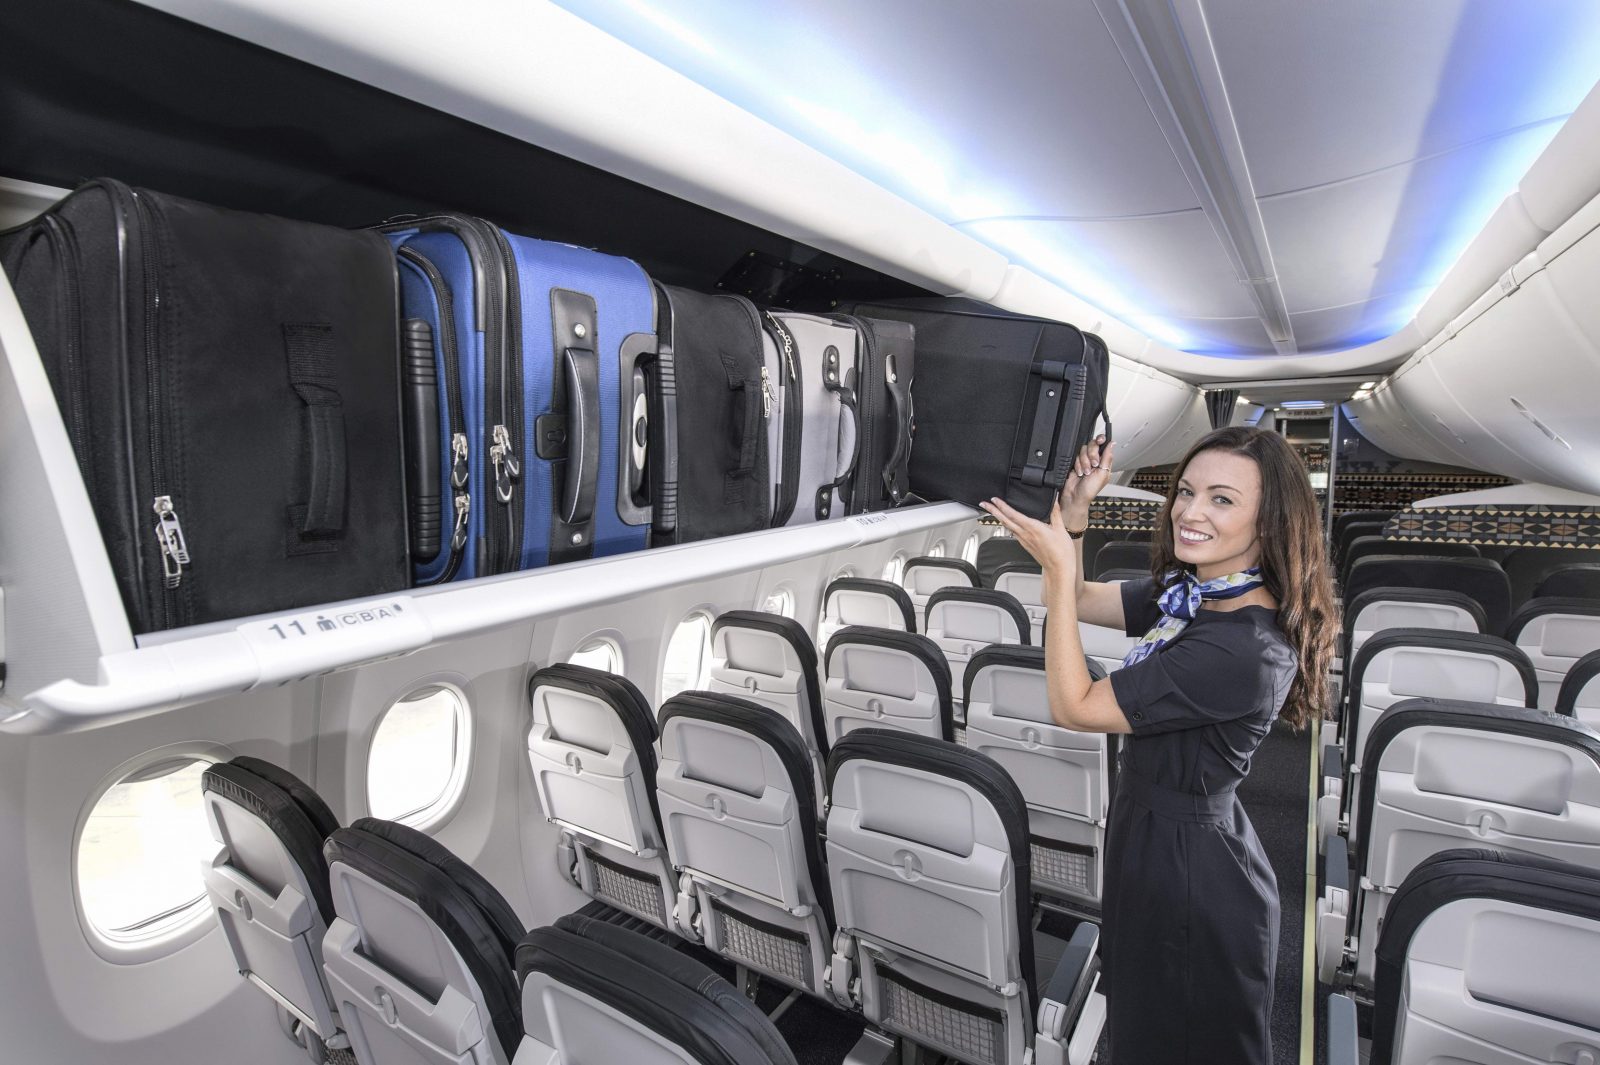 The Overhead Bin Wars: This Might Be The Craziest Invention Meant To Help Flight Attendants Yet